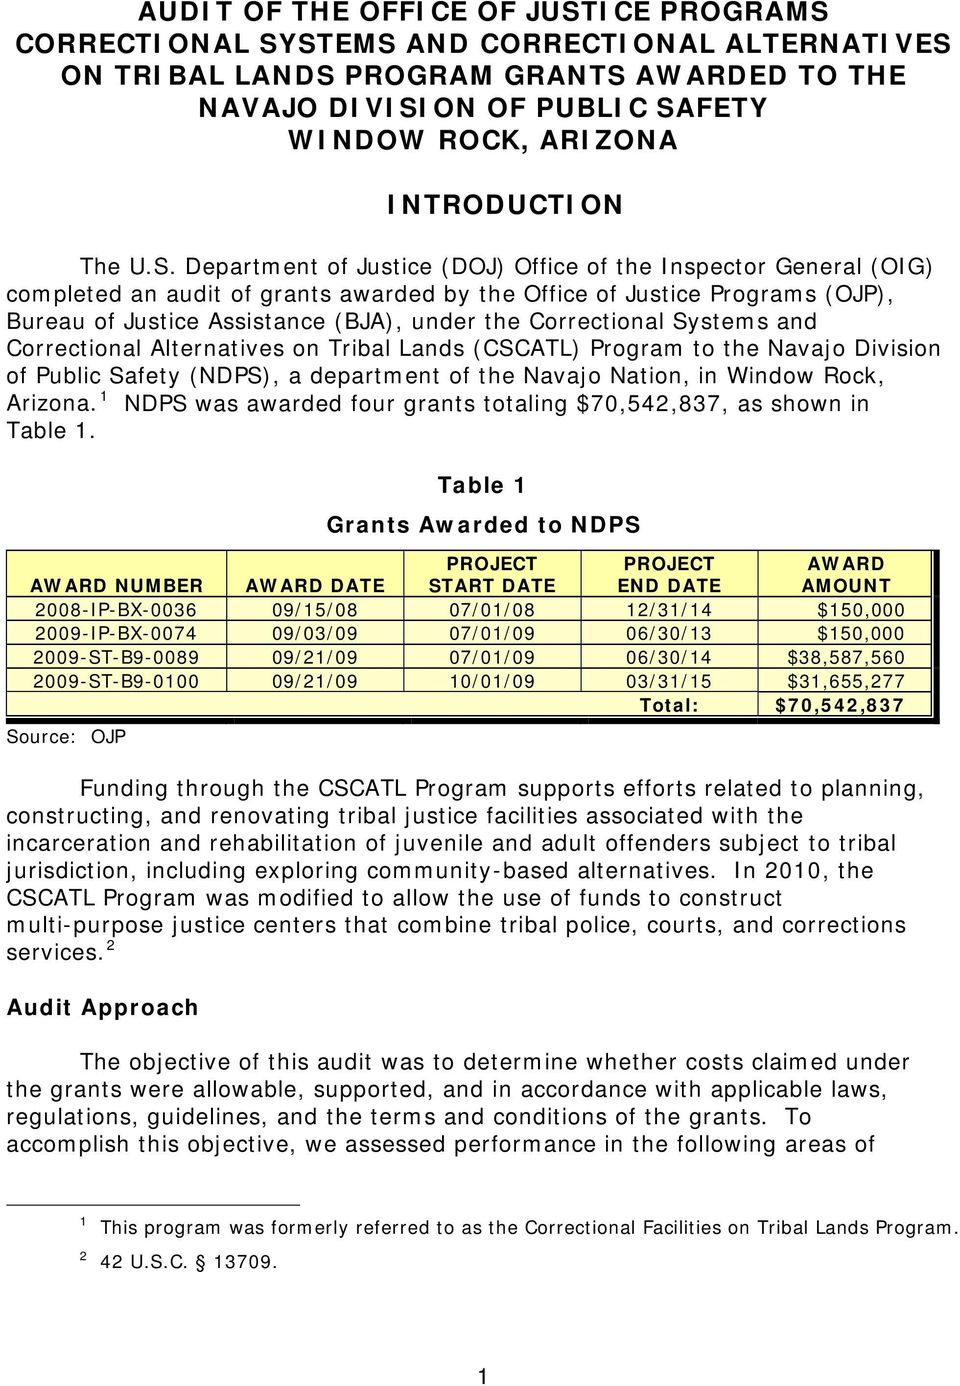 Department of Justice (DOJ) Office of the Inspector General (OIG) completed an audit of grants awarded by the Office of Justice Programs (OJP), Bureau of Justice Assistance (BJA), under the